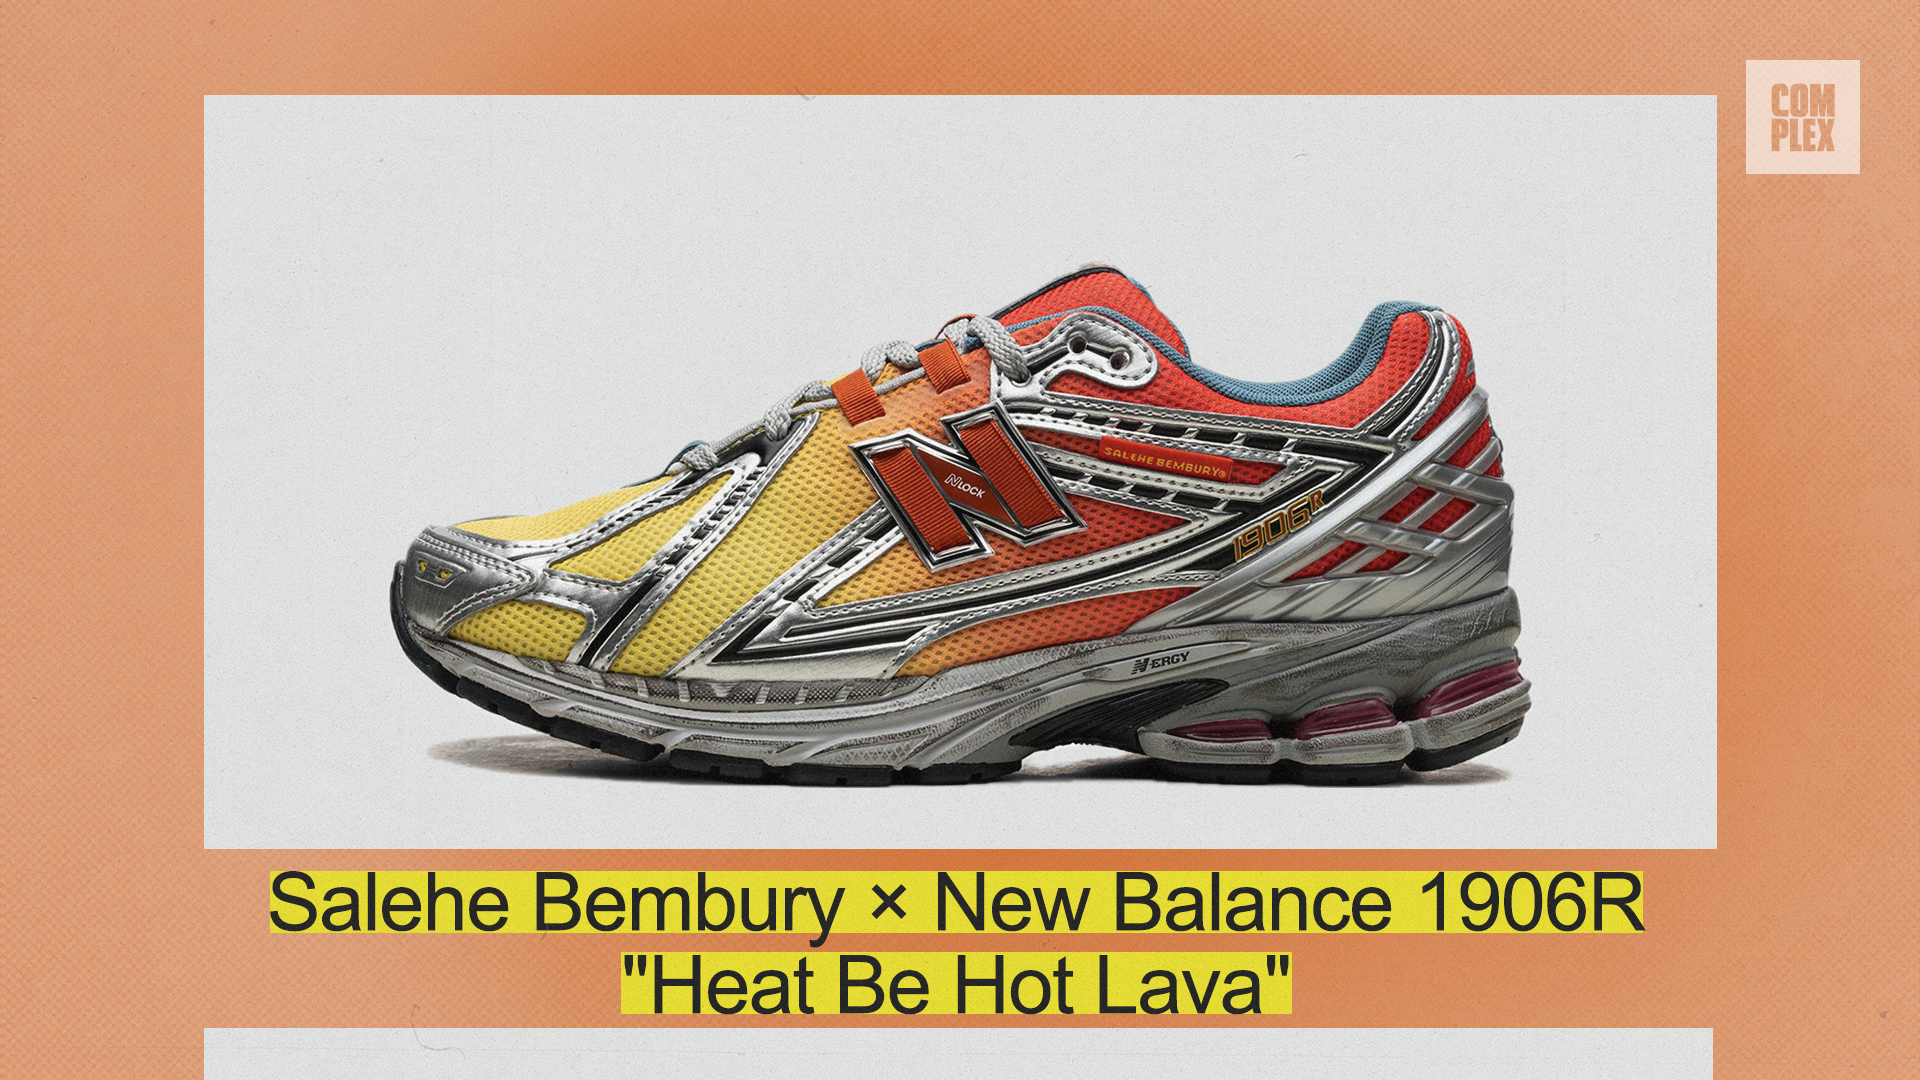 Salehe Bembury x New Balance 1906R &quot;Heat Be Hot Lava&quot; sneaker displayed against a background with &quot;Complex&quot; logo in the top corner